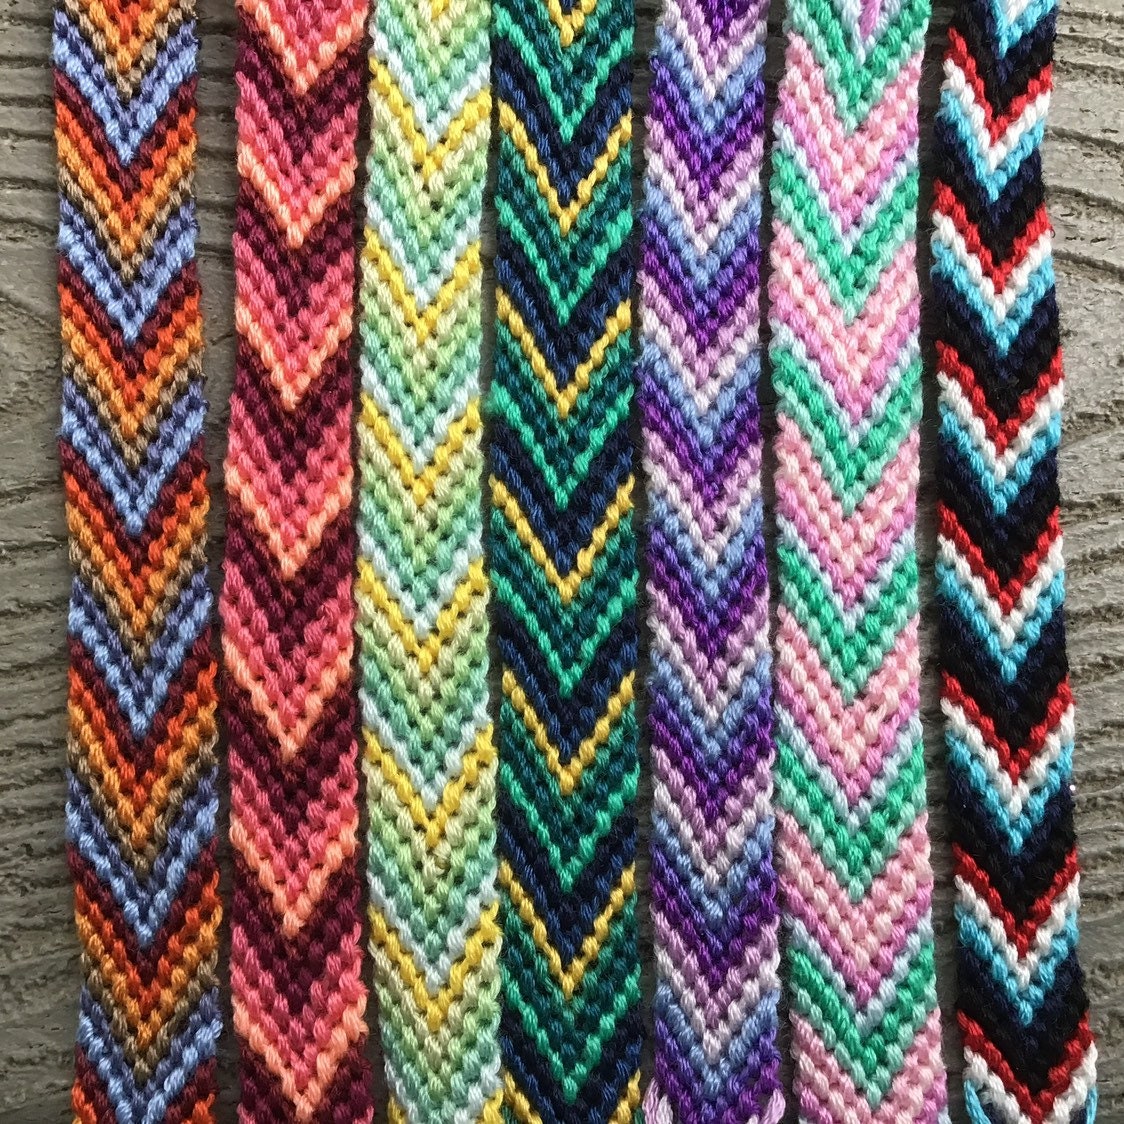 Custom Color Friendship Bracelet Choose Your Own Colors Any Colors Available - Etsy